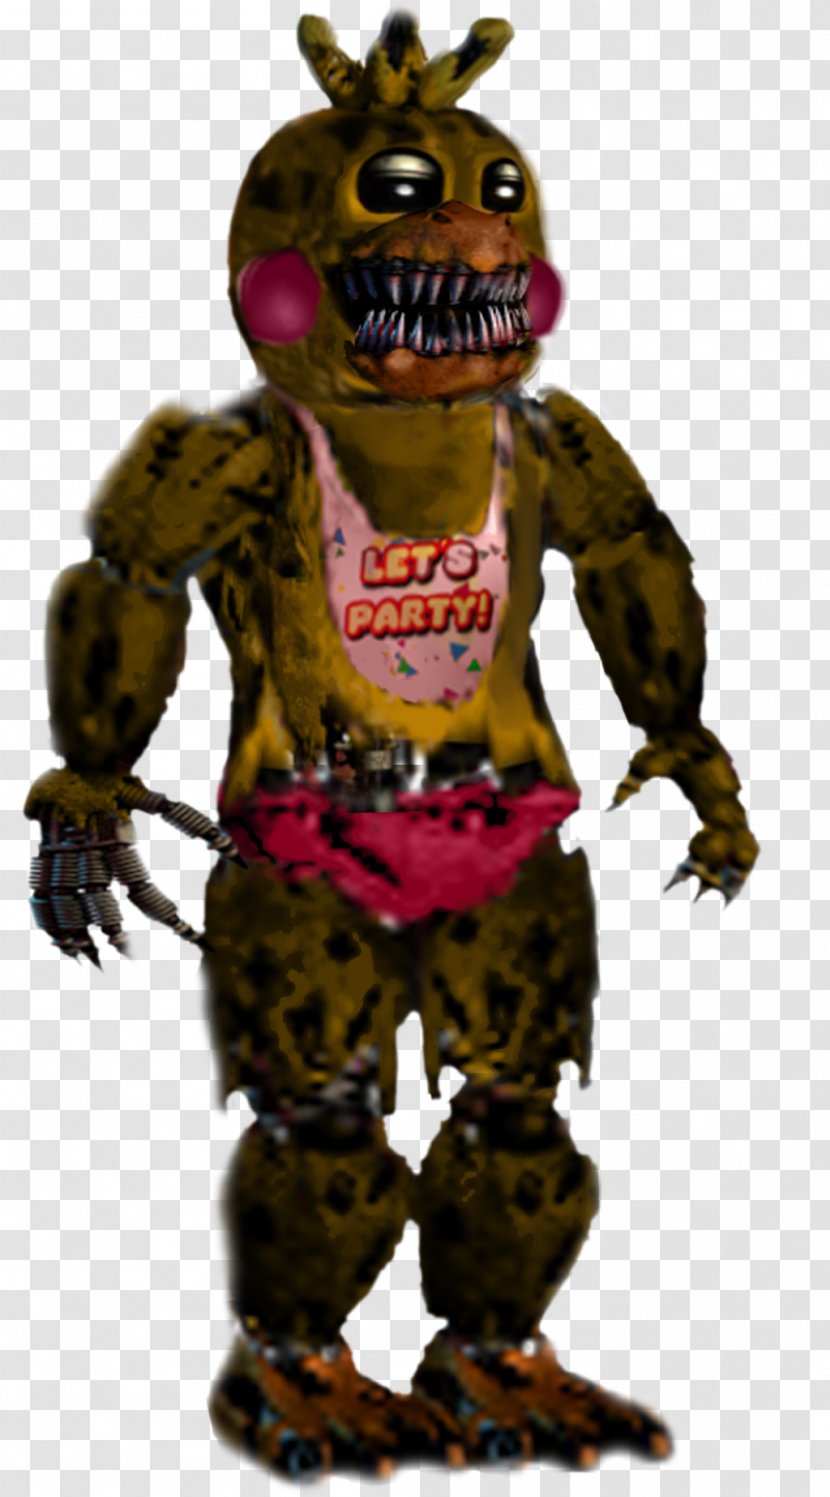 Five Nights At Freddy's 4 Toy Nightmare - Action Figures - Foxy Transparent PNG